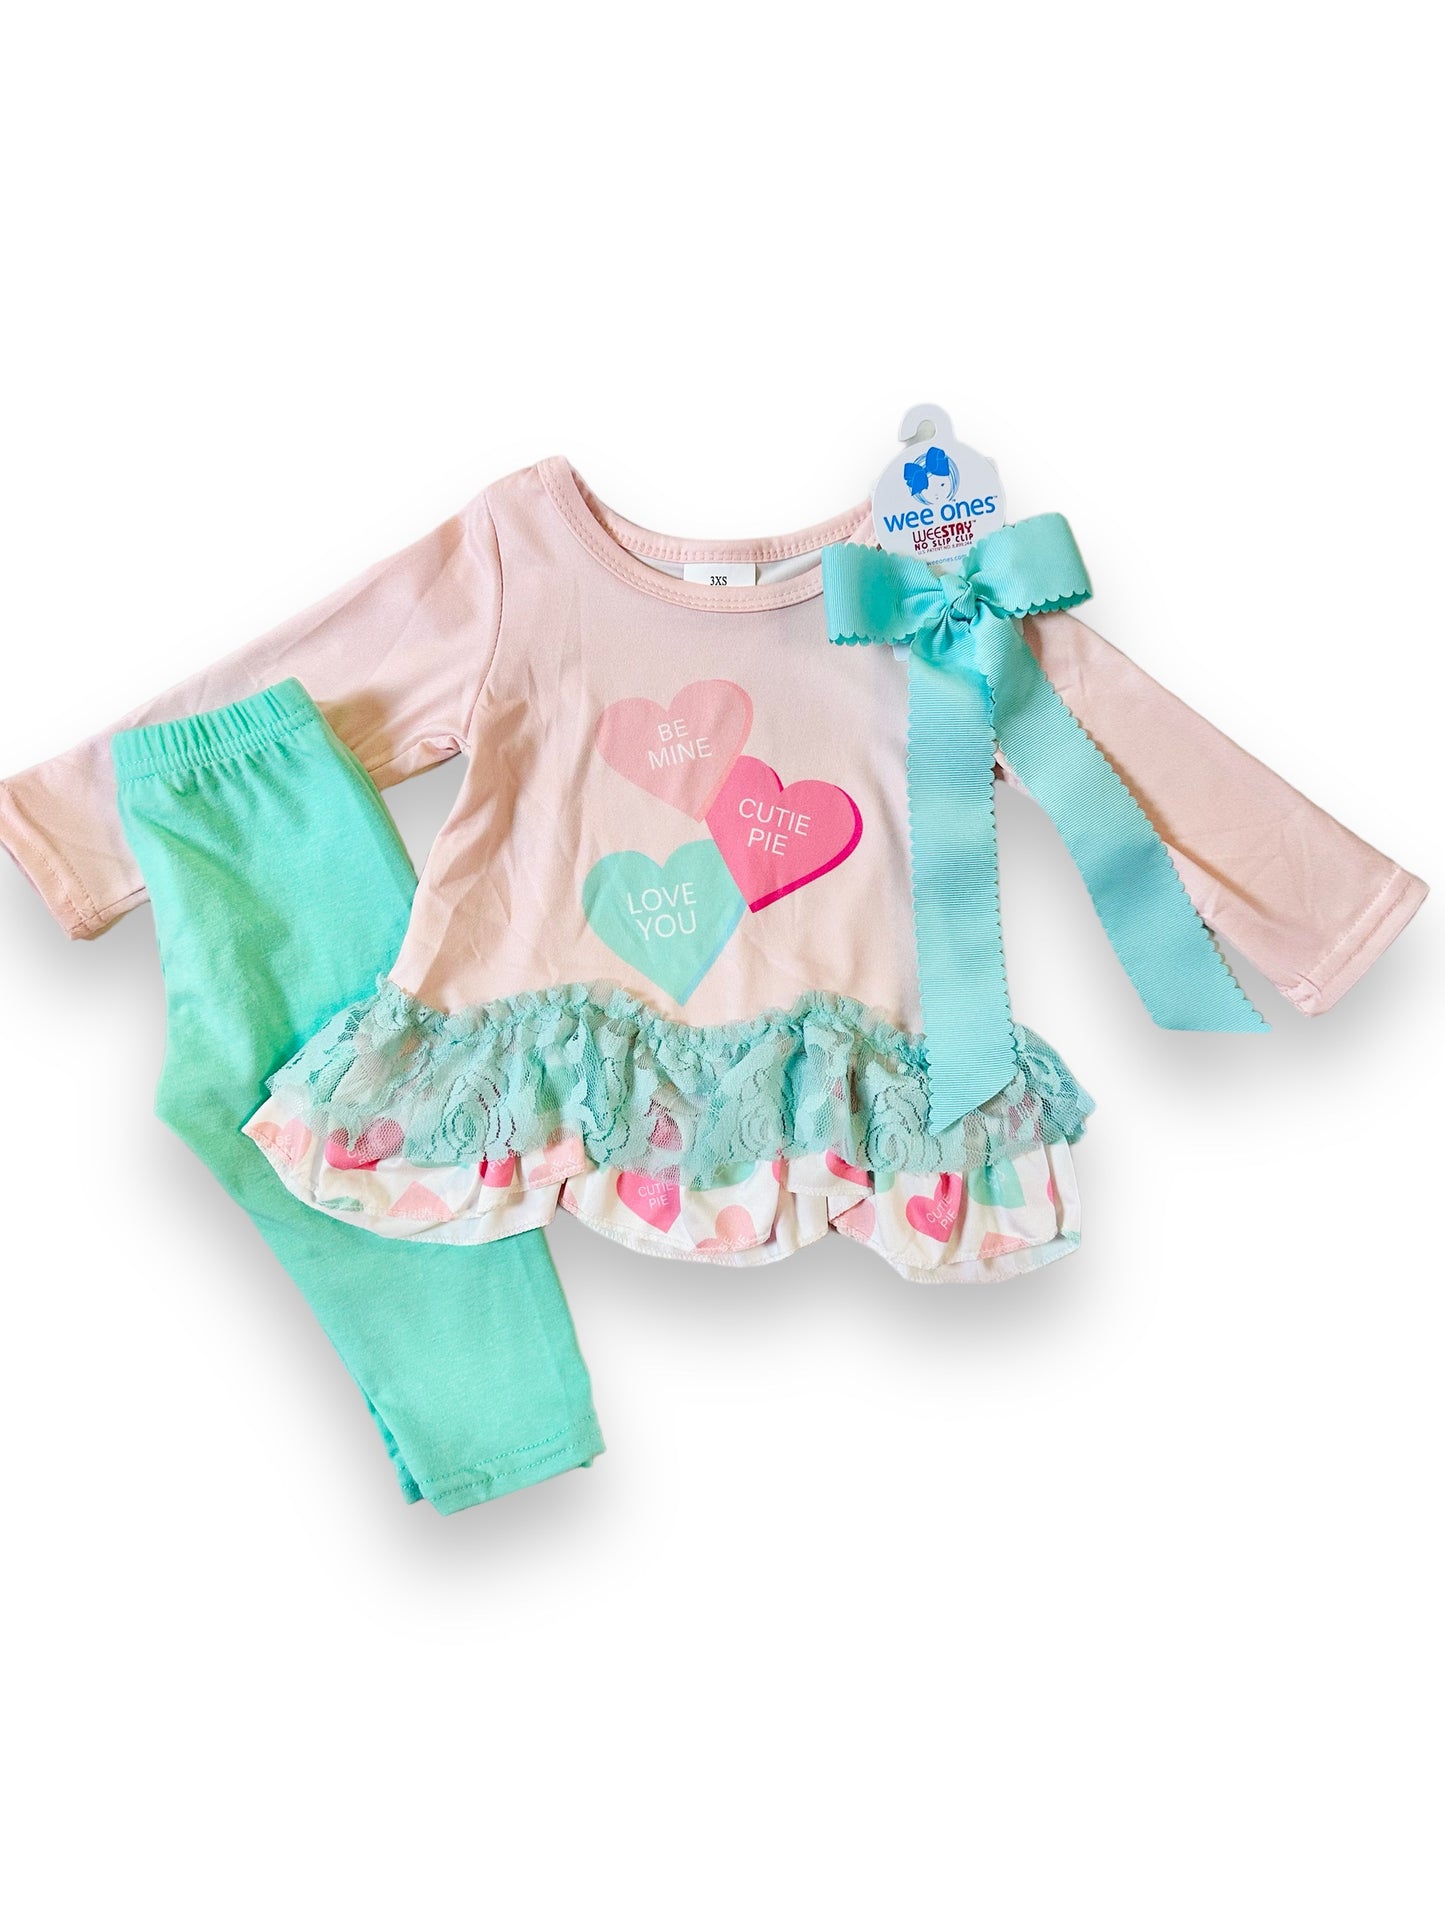 Lace Hearts Girl Set